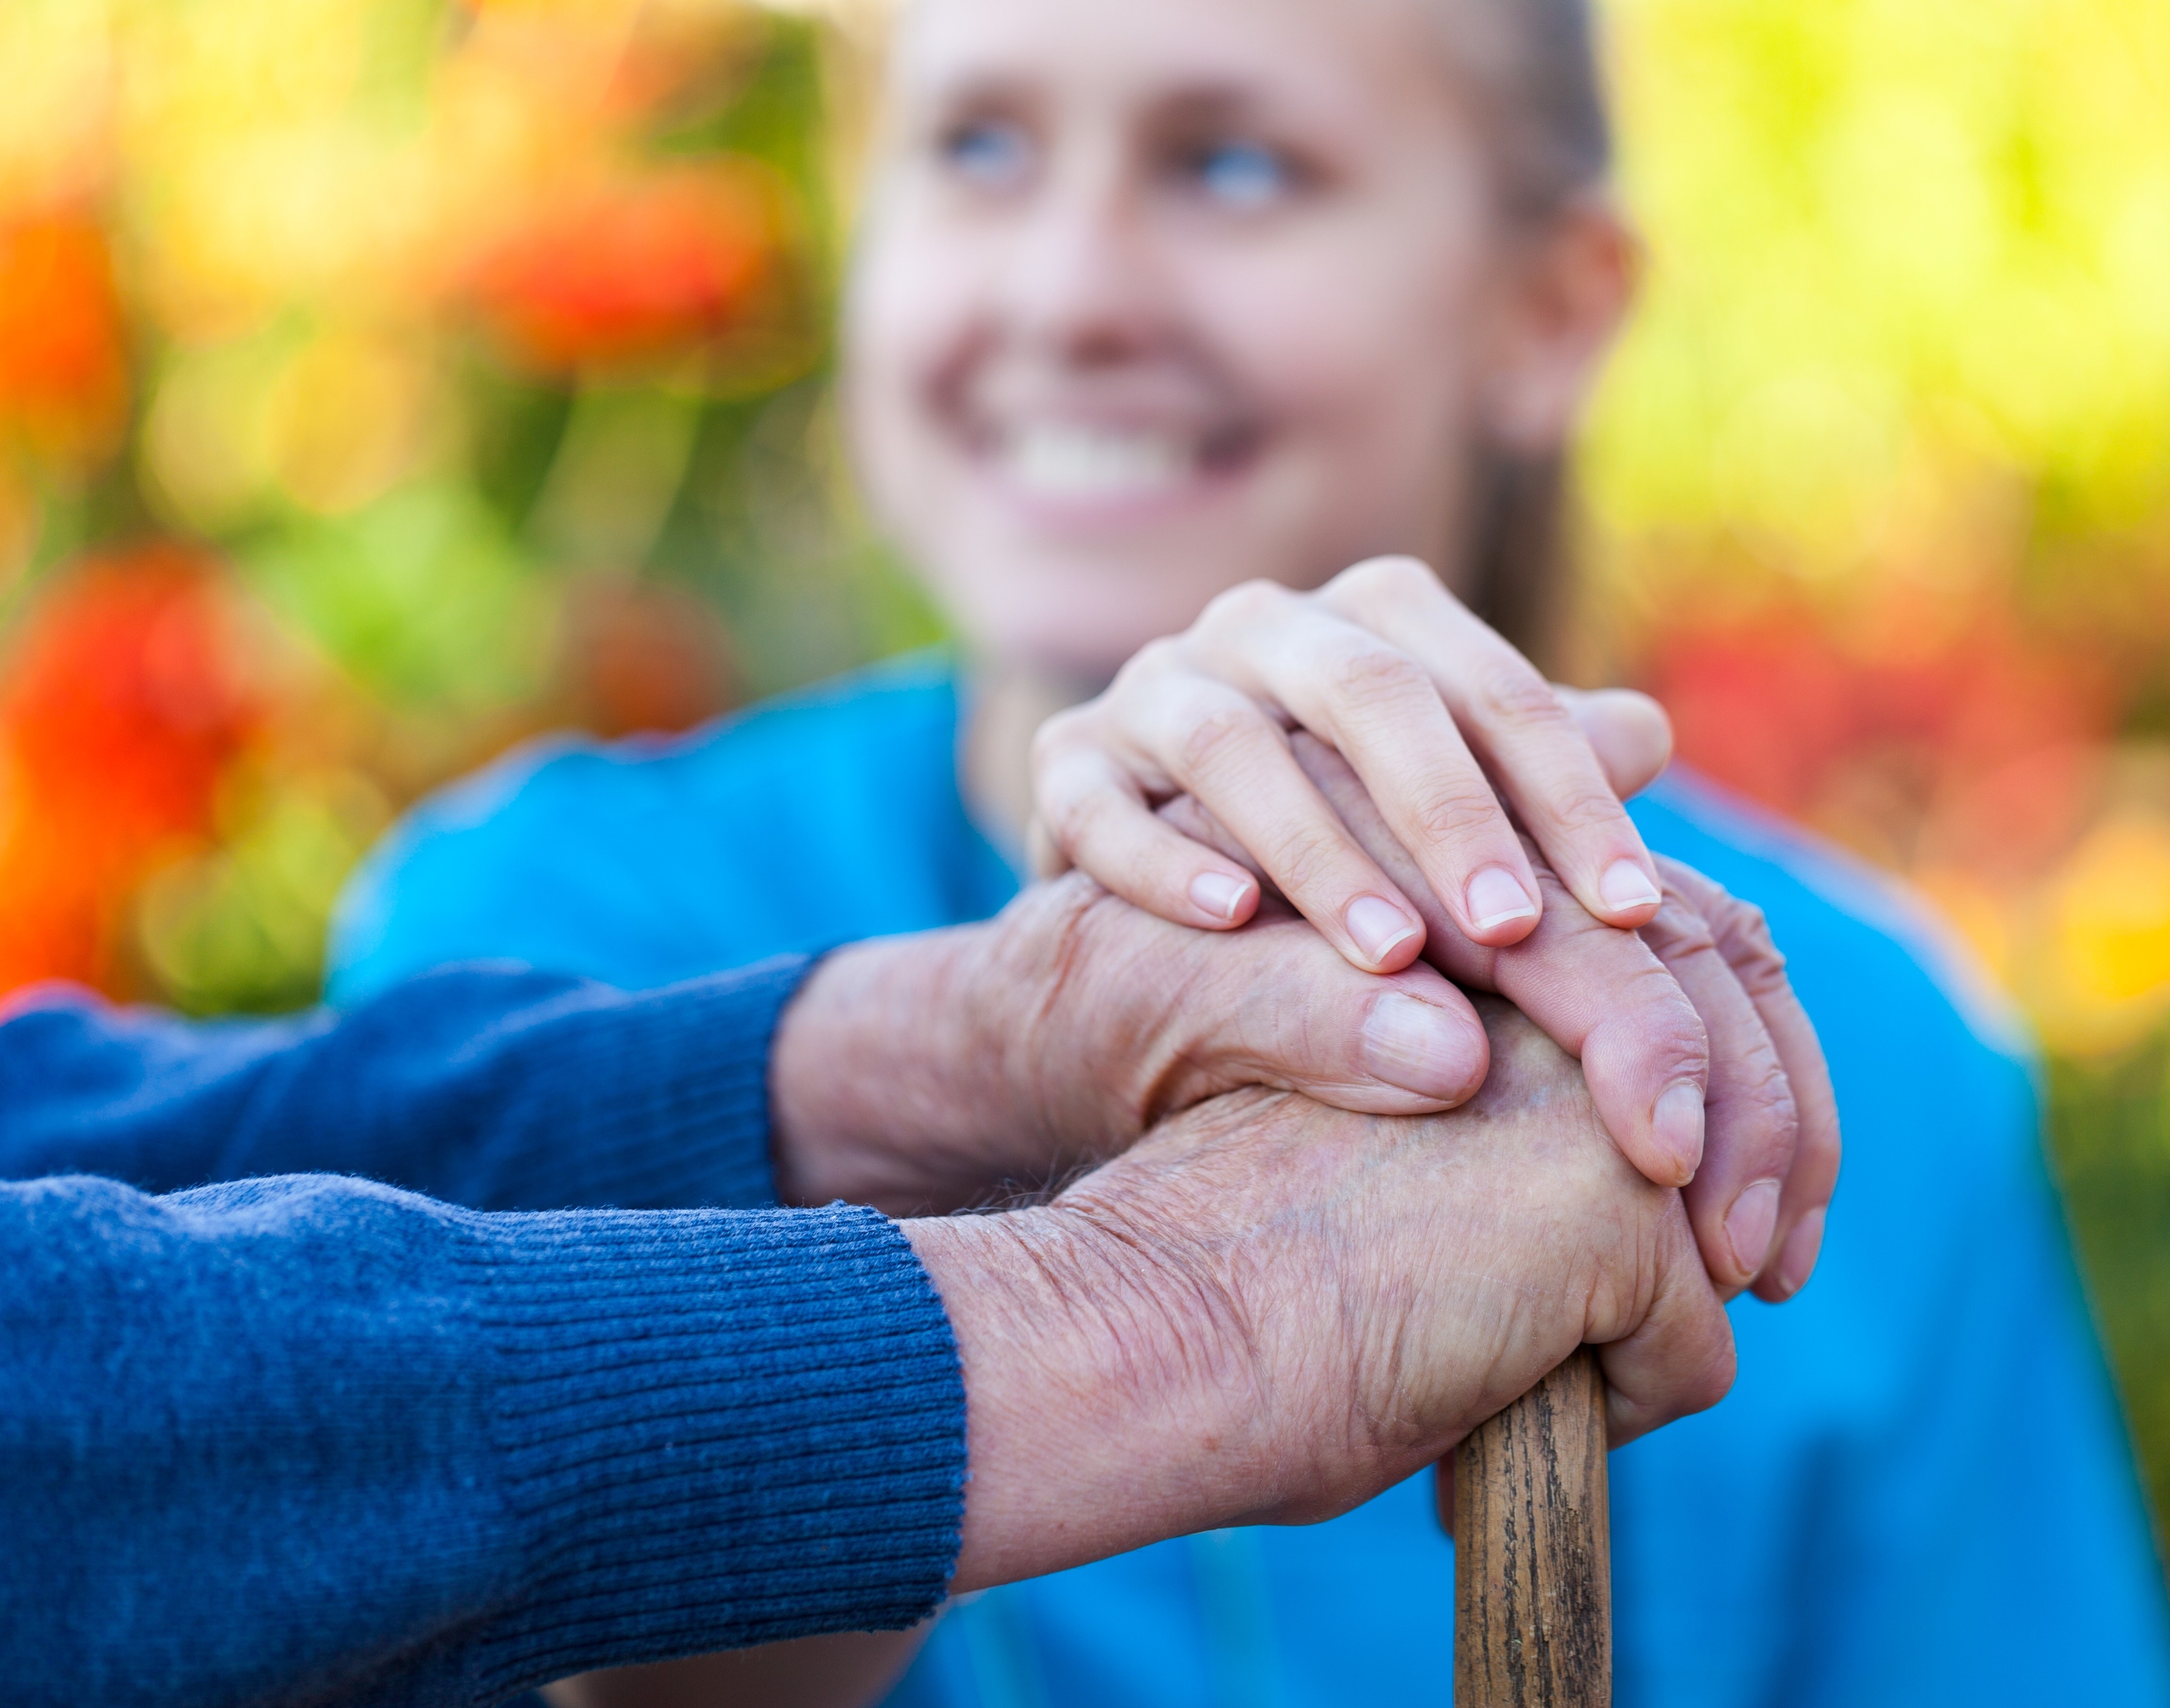 Elderly Care in Los Gatos CA: Watching for Safety Issues